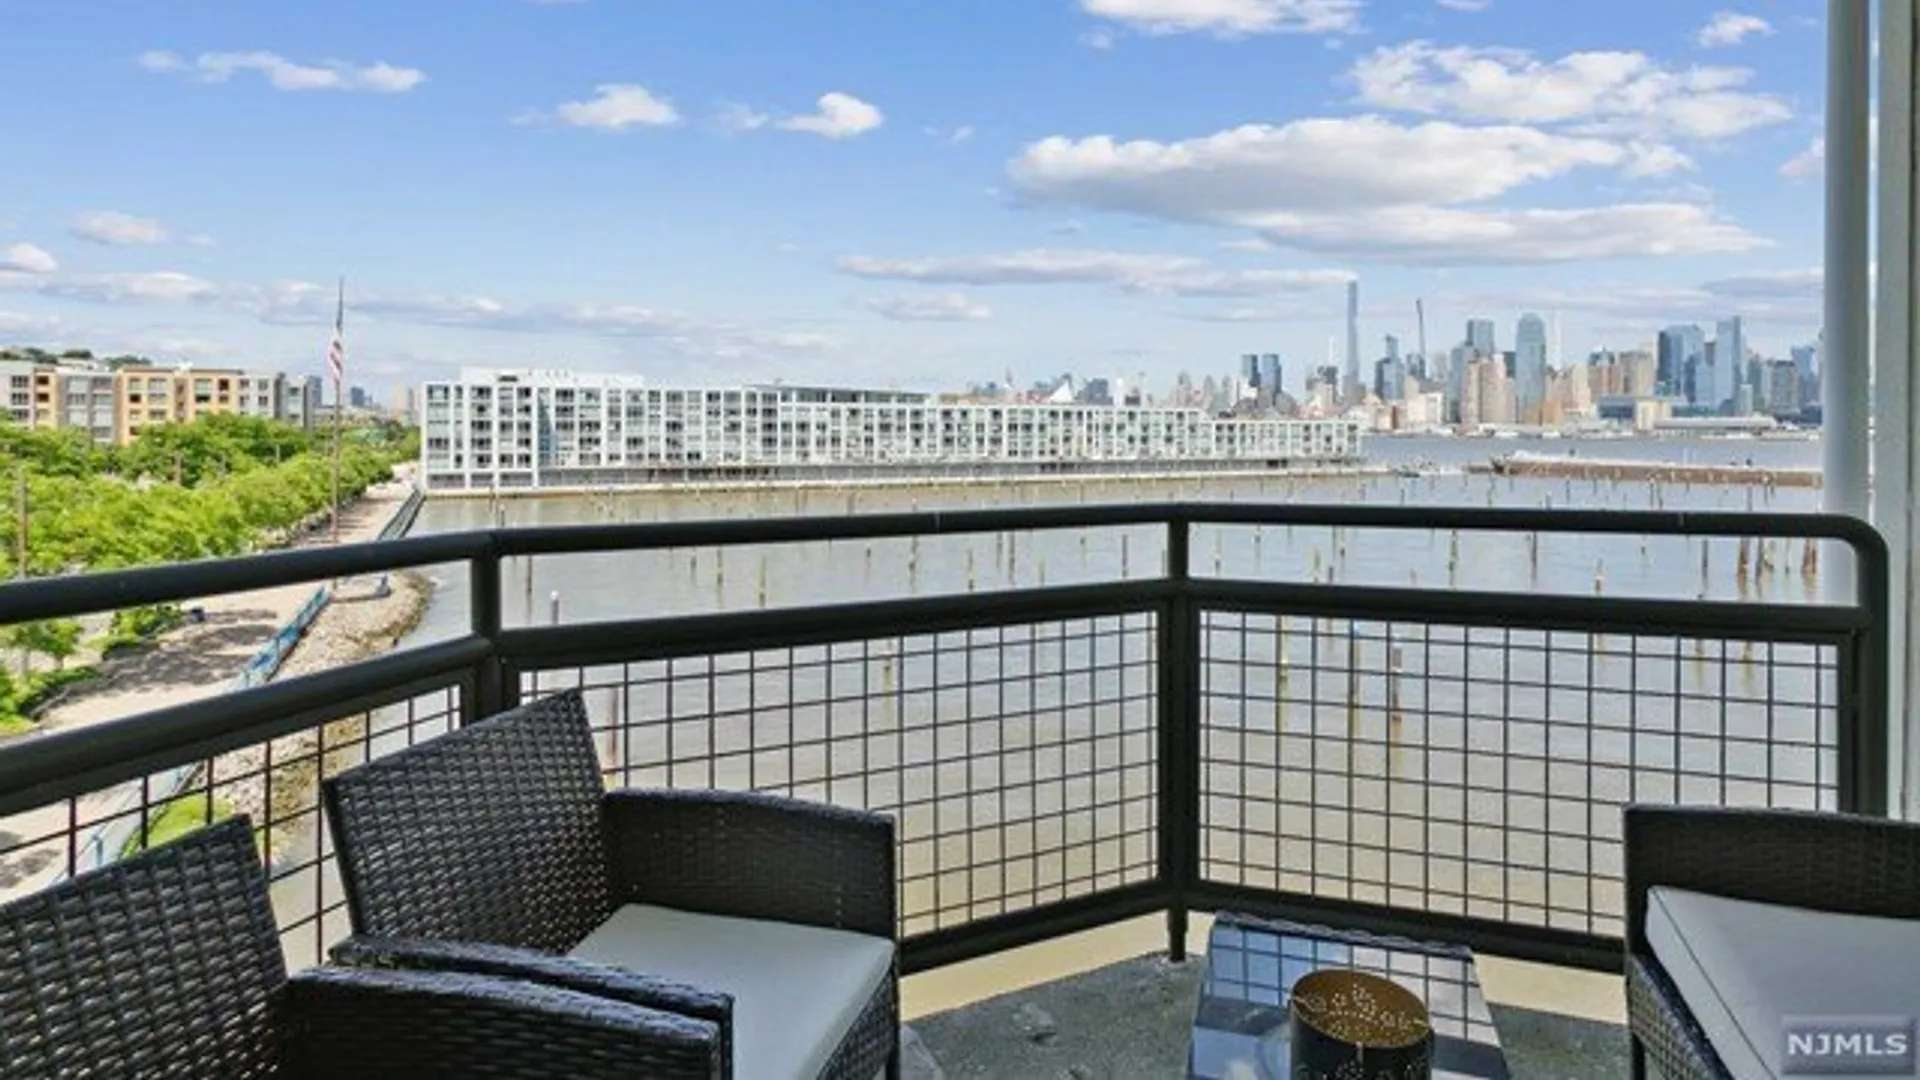 Lincoln Harbor Yacht Club, Hudson River Waterfront Walkway, Weehawken, NJ 07086, USA | 1 bed condo for rent